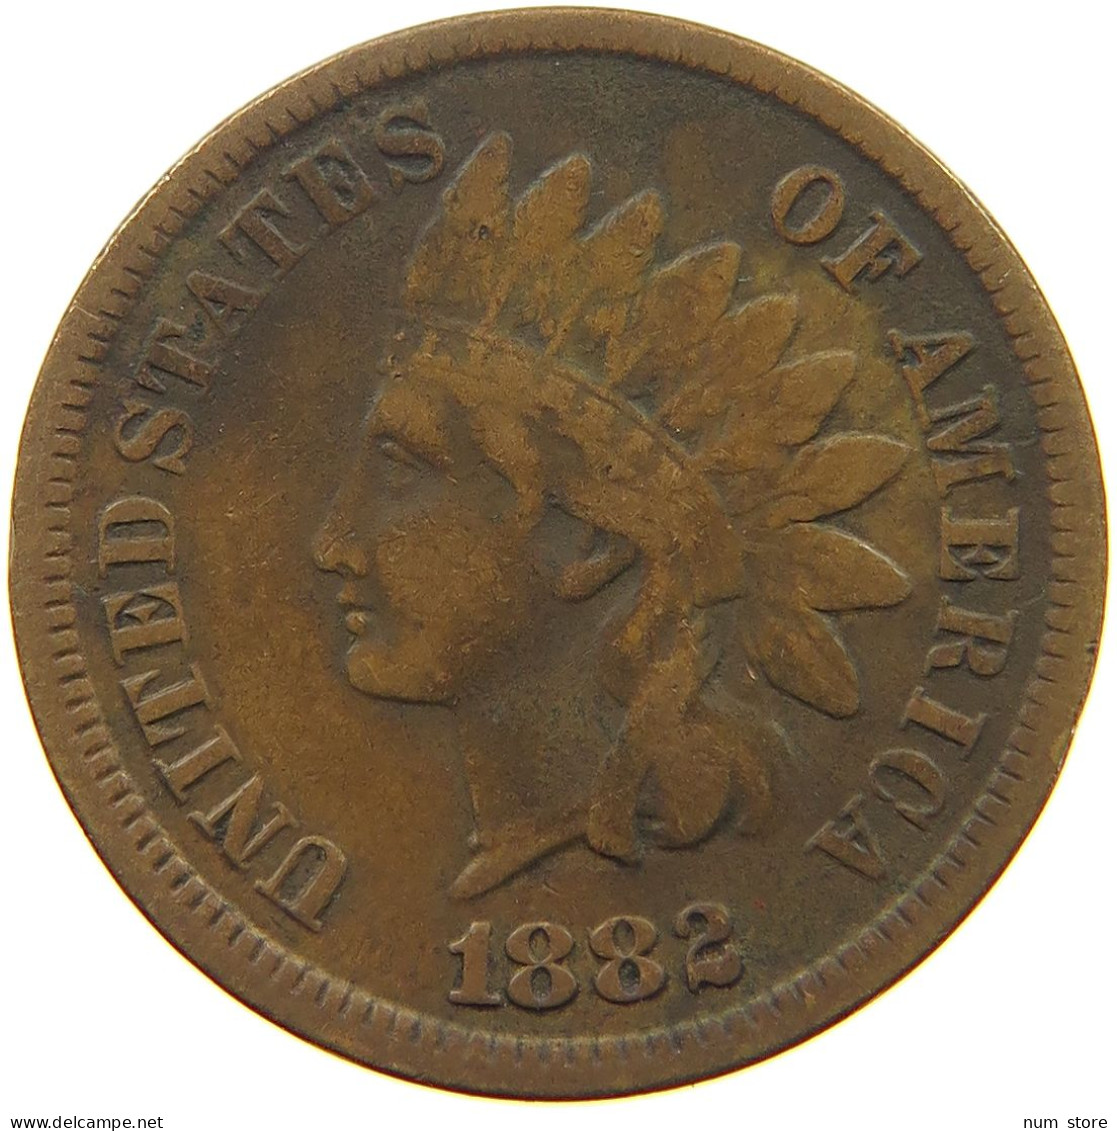 UNITED STATES OF AMERICA CENT 1882 INDIAN HEAD #t140 0605 - 1859-1909: Indian Head